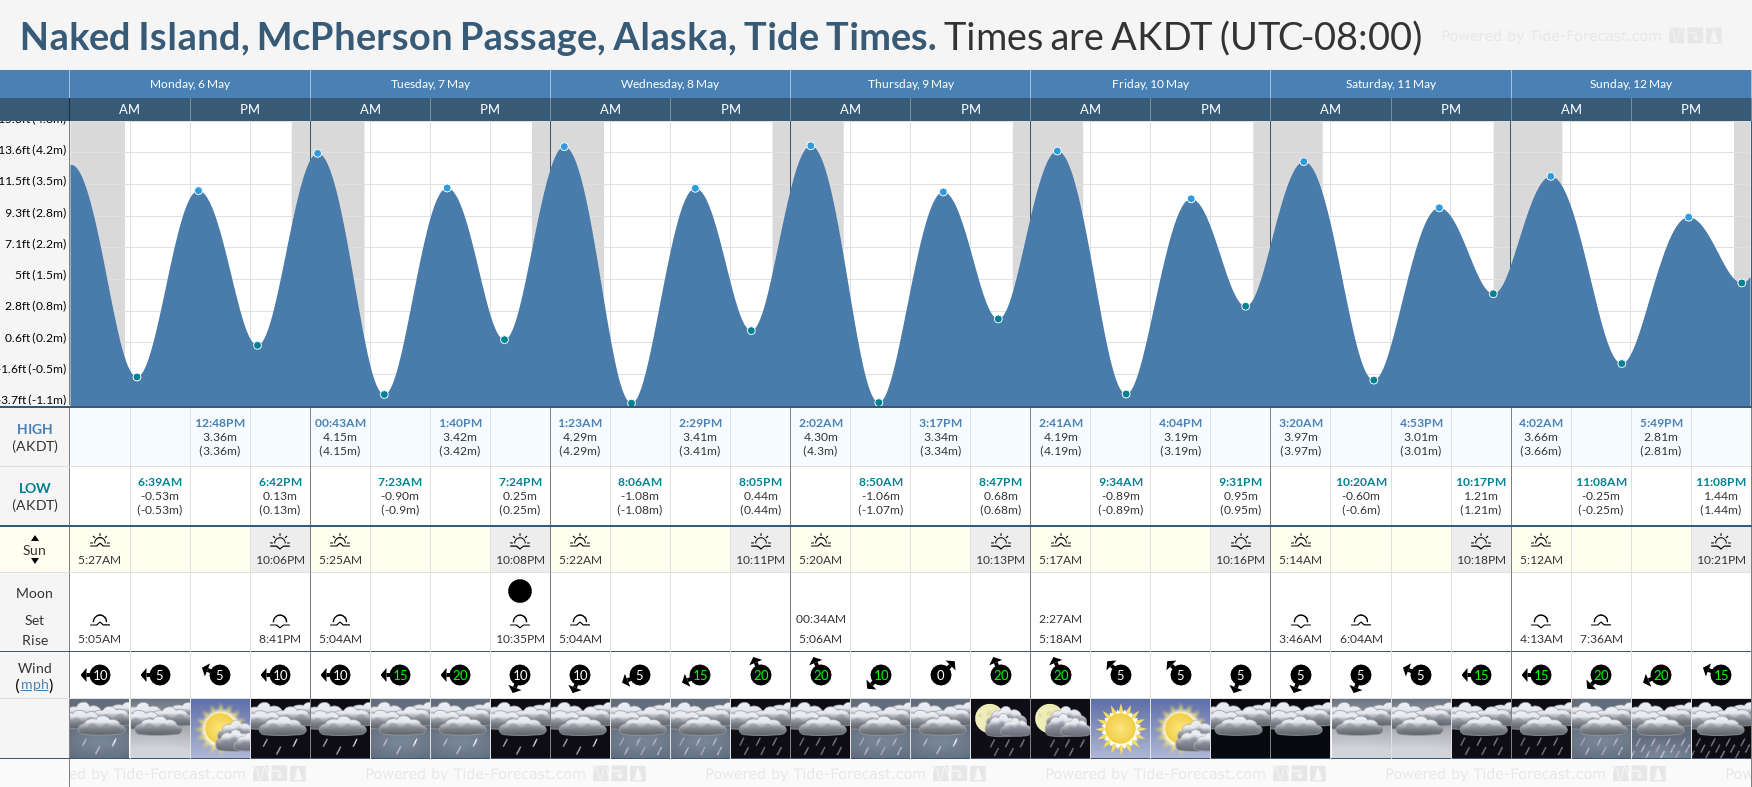 Naked Island, McPherson Passage, Alaska Tide Chart including high and low tide tide times for the next 7 days